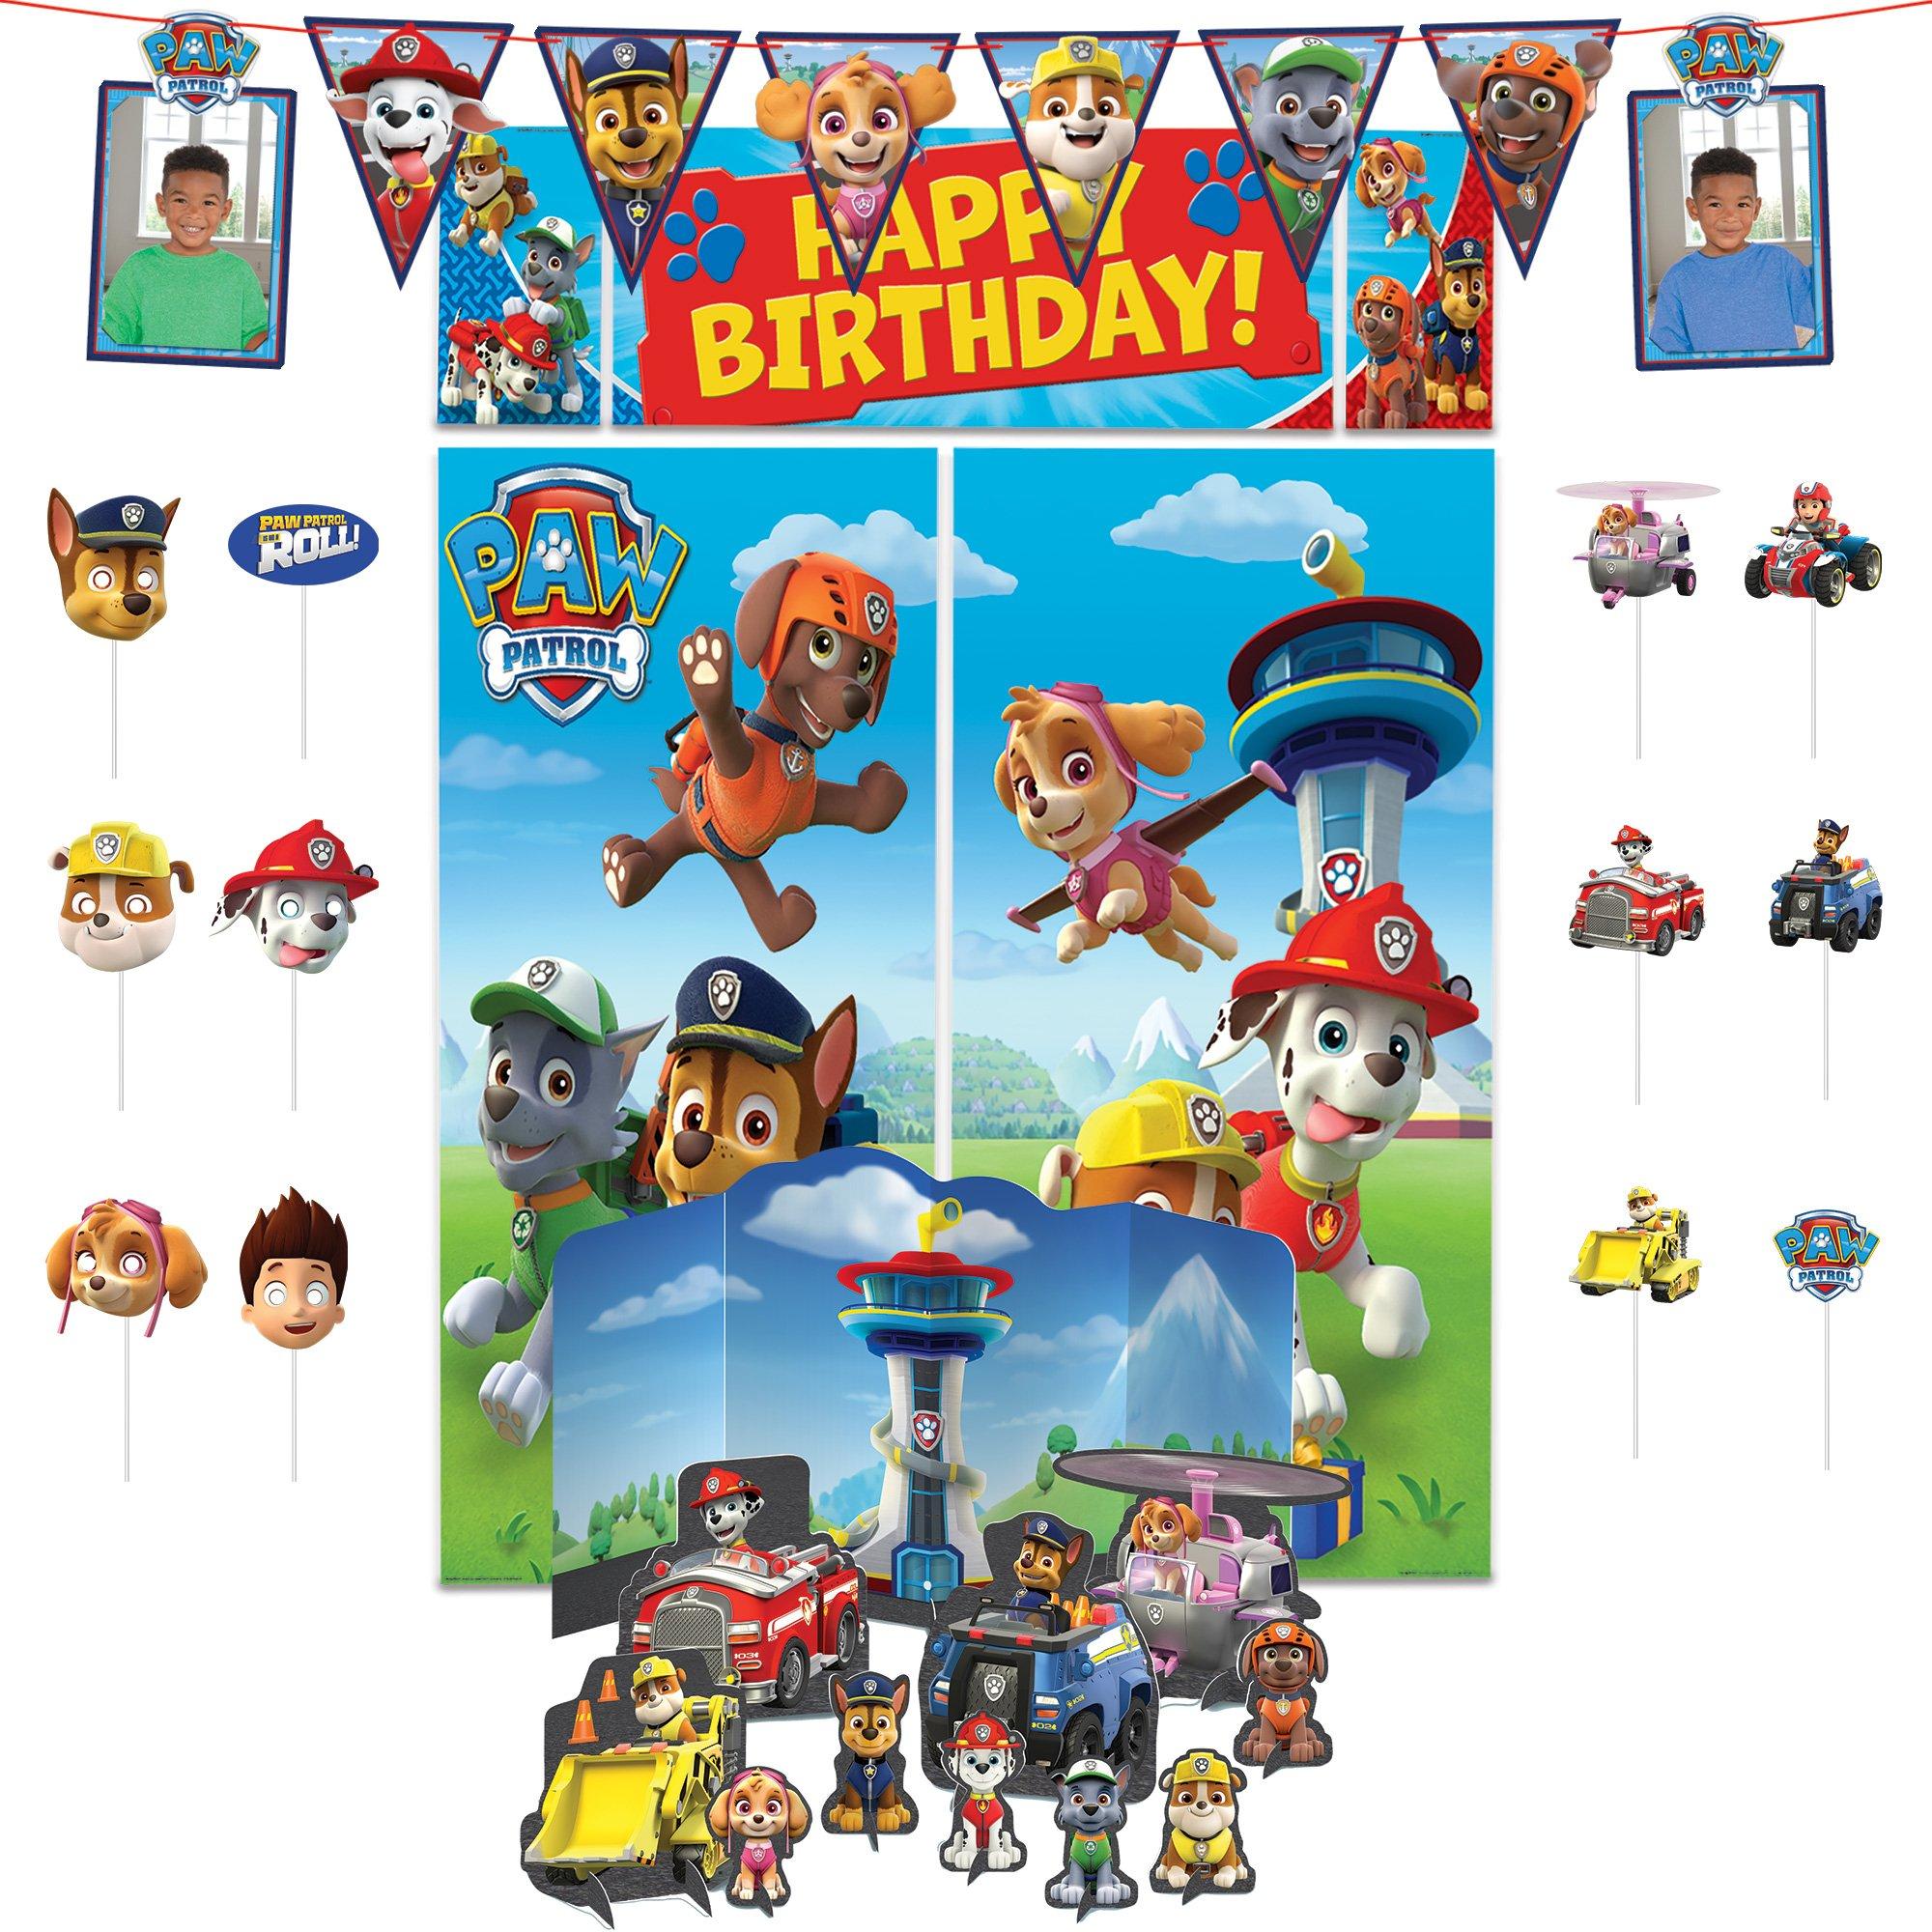 PAW Patrol Party Decorating Supplies Pack - Kit Includes Banner, Swirl Decorations & Centerpiece